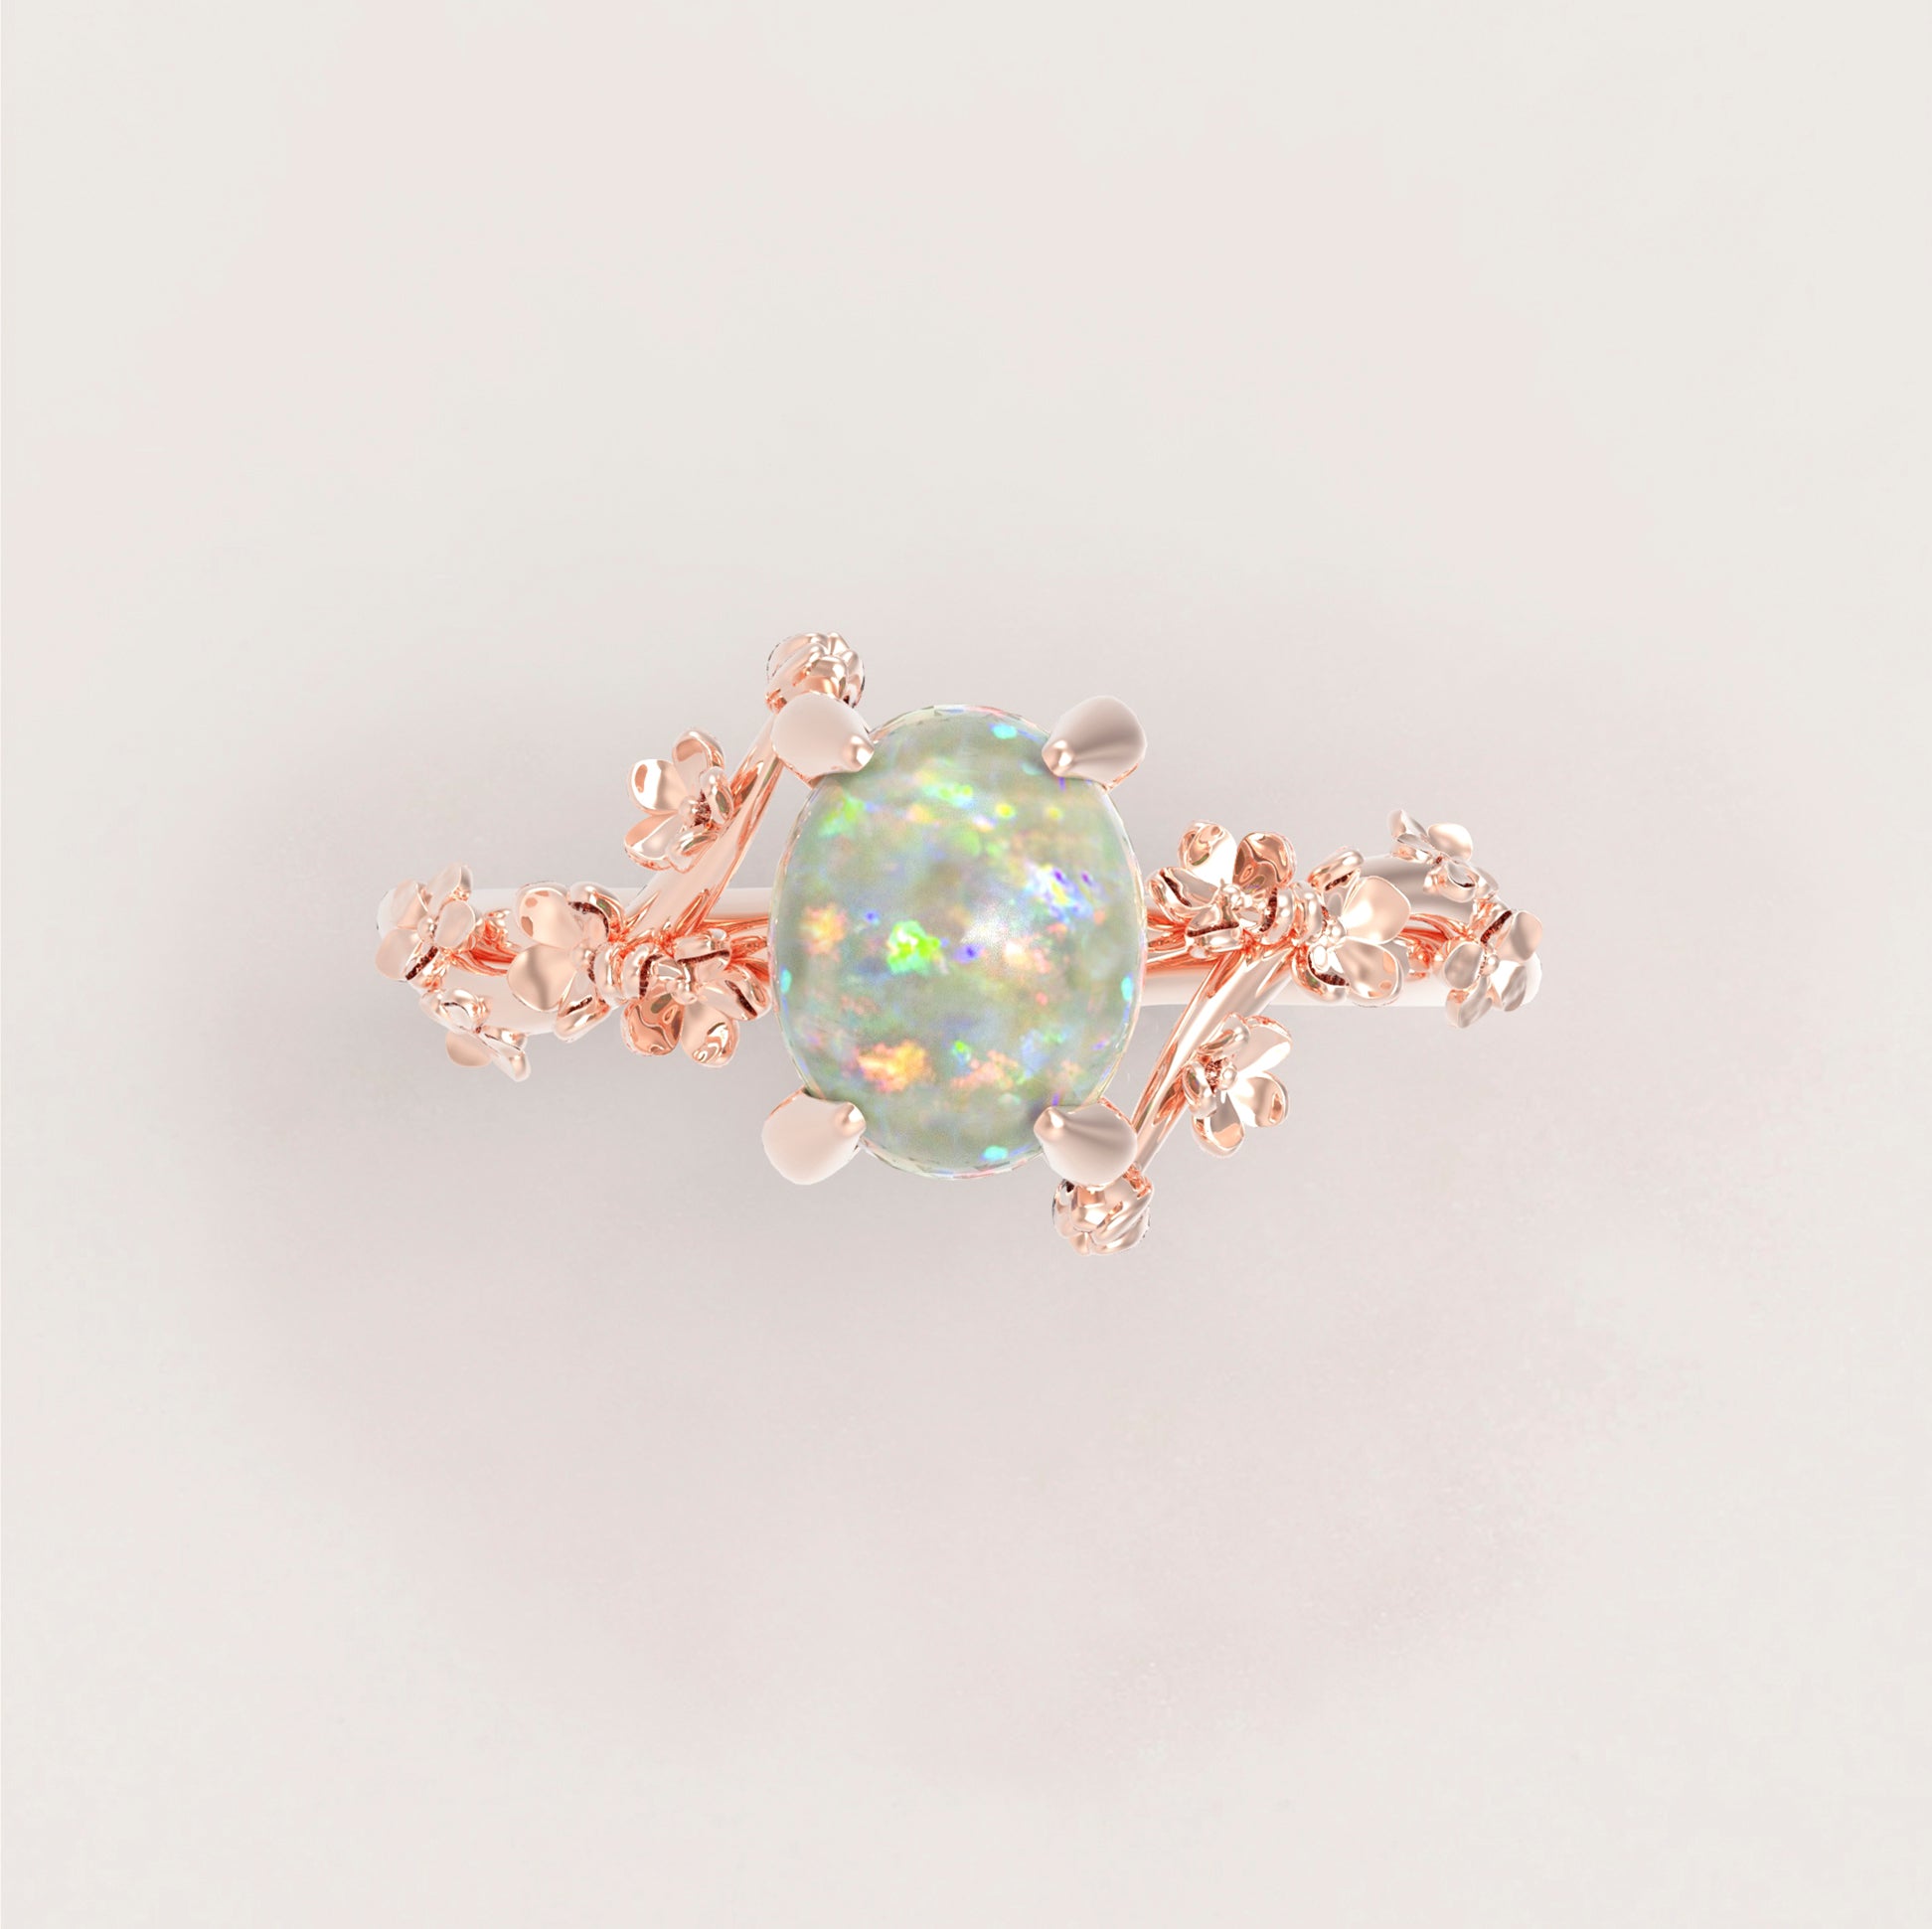 Unique Flowers Engagement Ring No.6 in Rose Gold - Opal - Roelavi